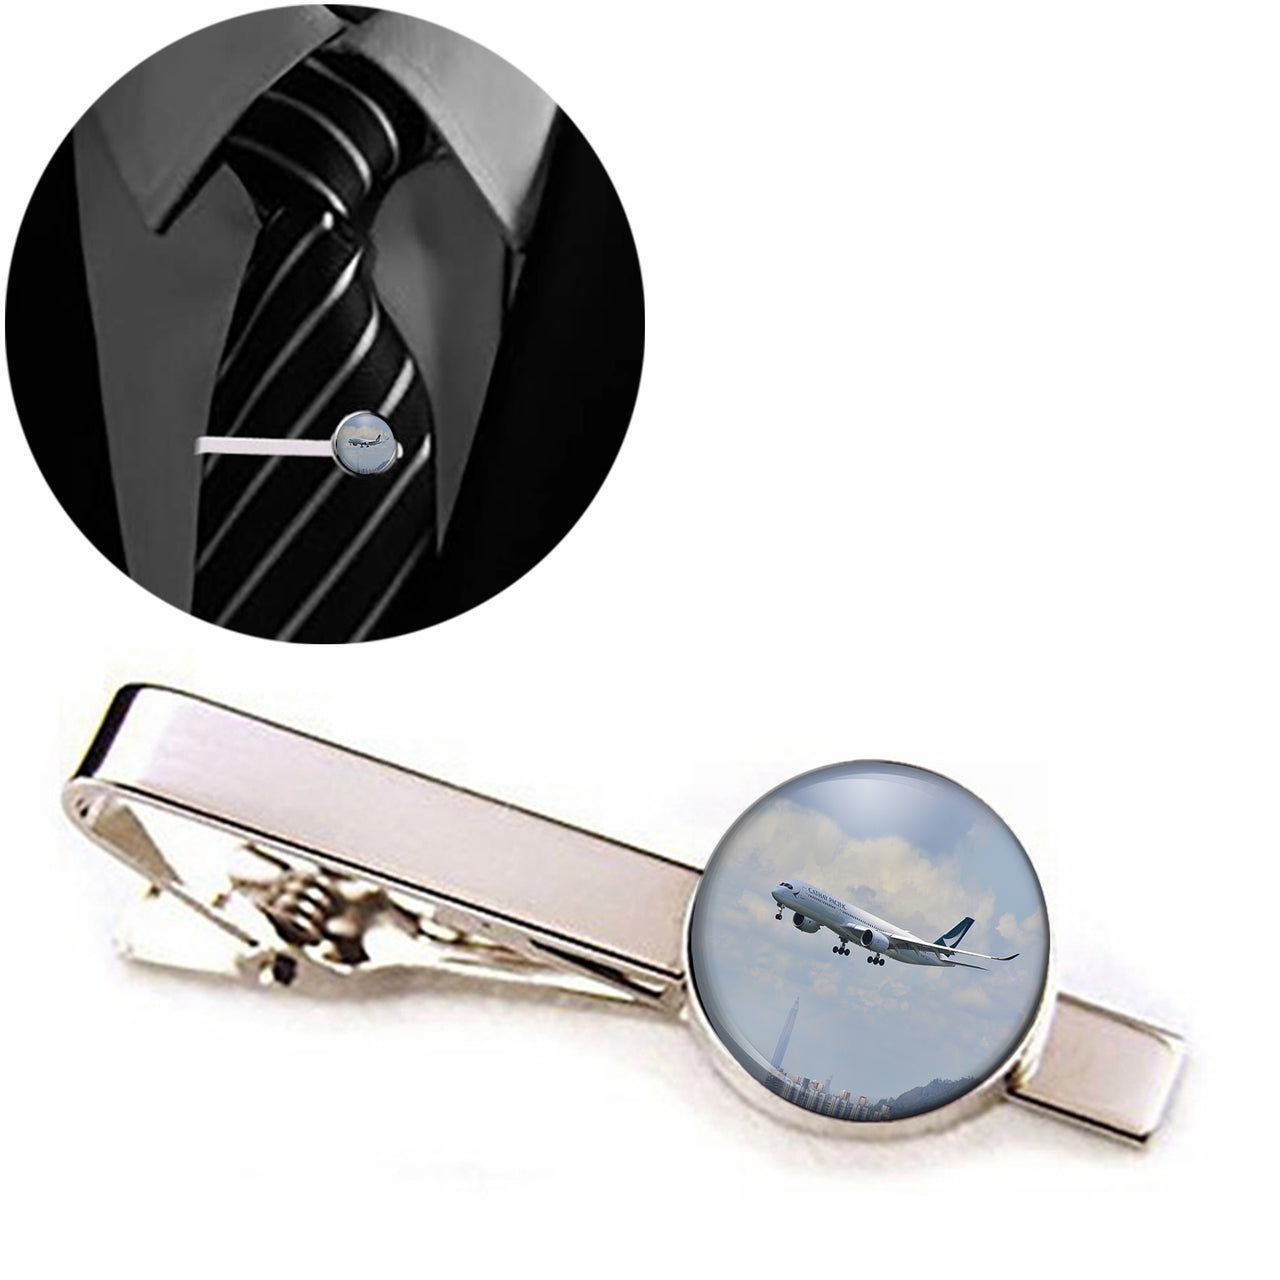 Cathay Pacific Airbus A350 Designed Tie Clips